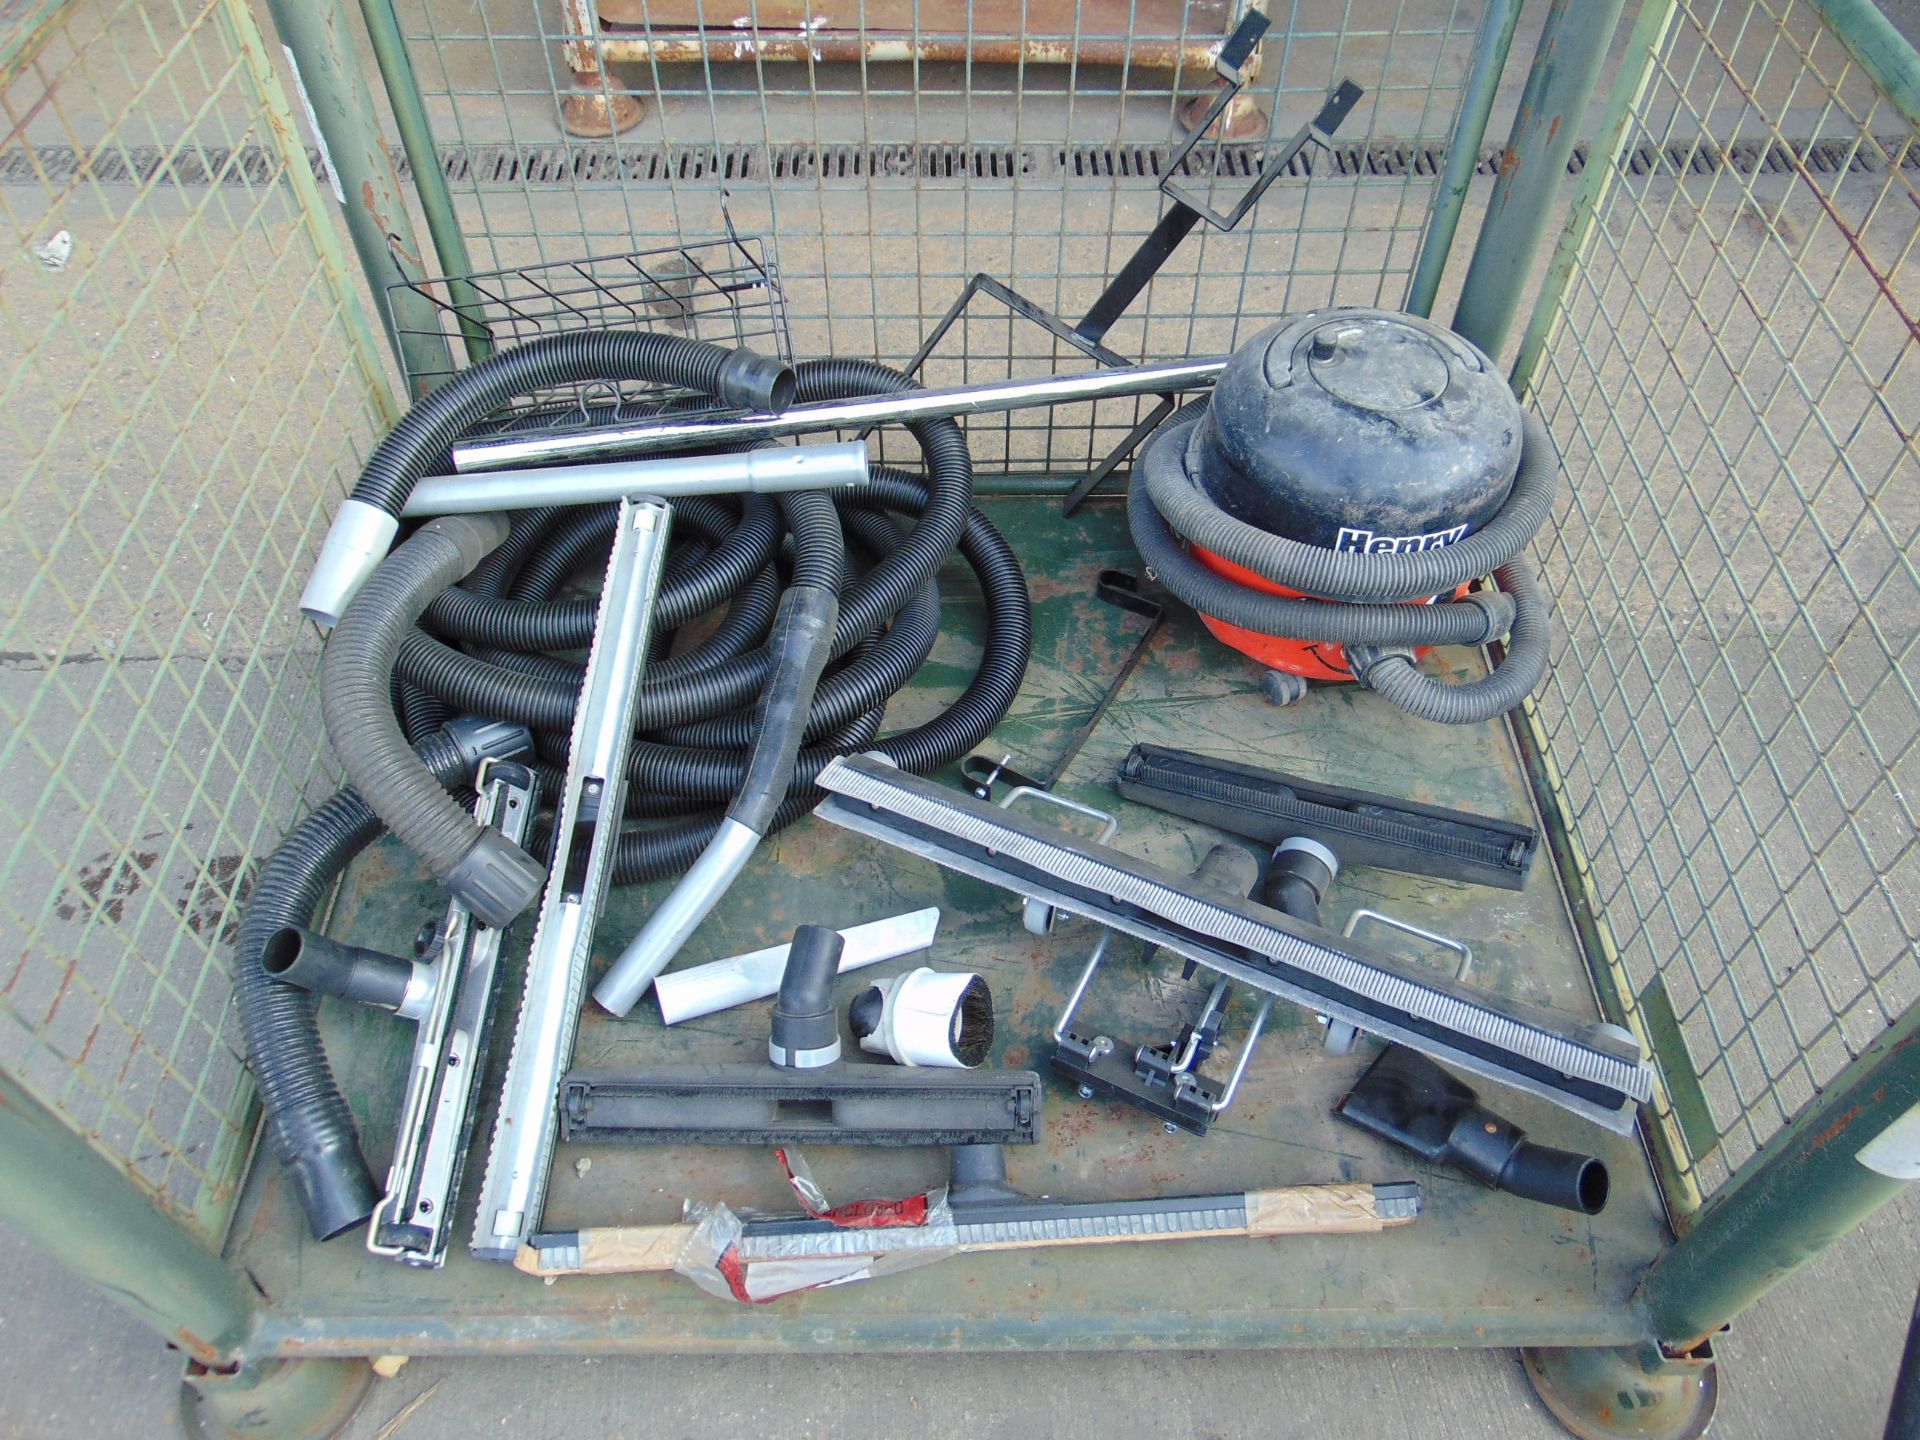 1 x Euroclean Shop Vacuum & Henry Vacuum w/ Trolley, Piping, Various Attachments etc. - Image 10 of 11